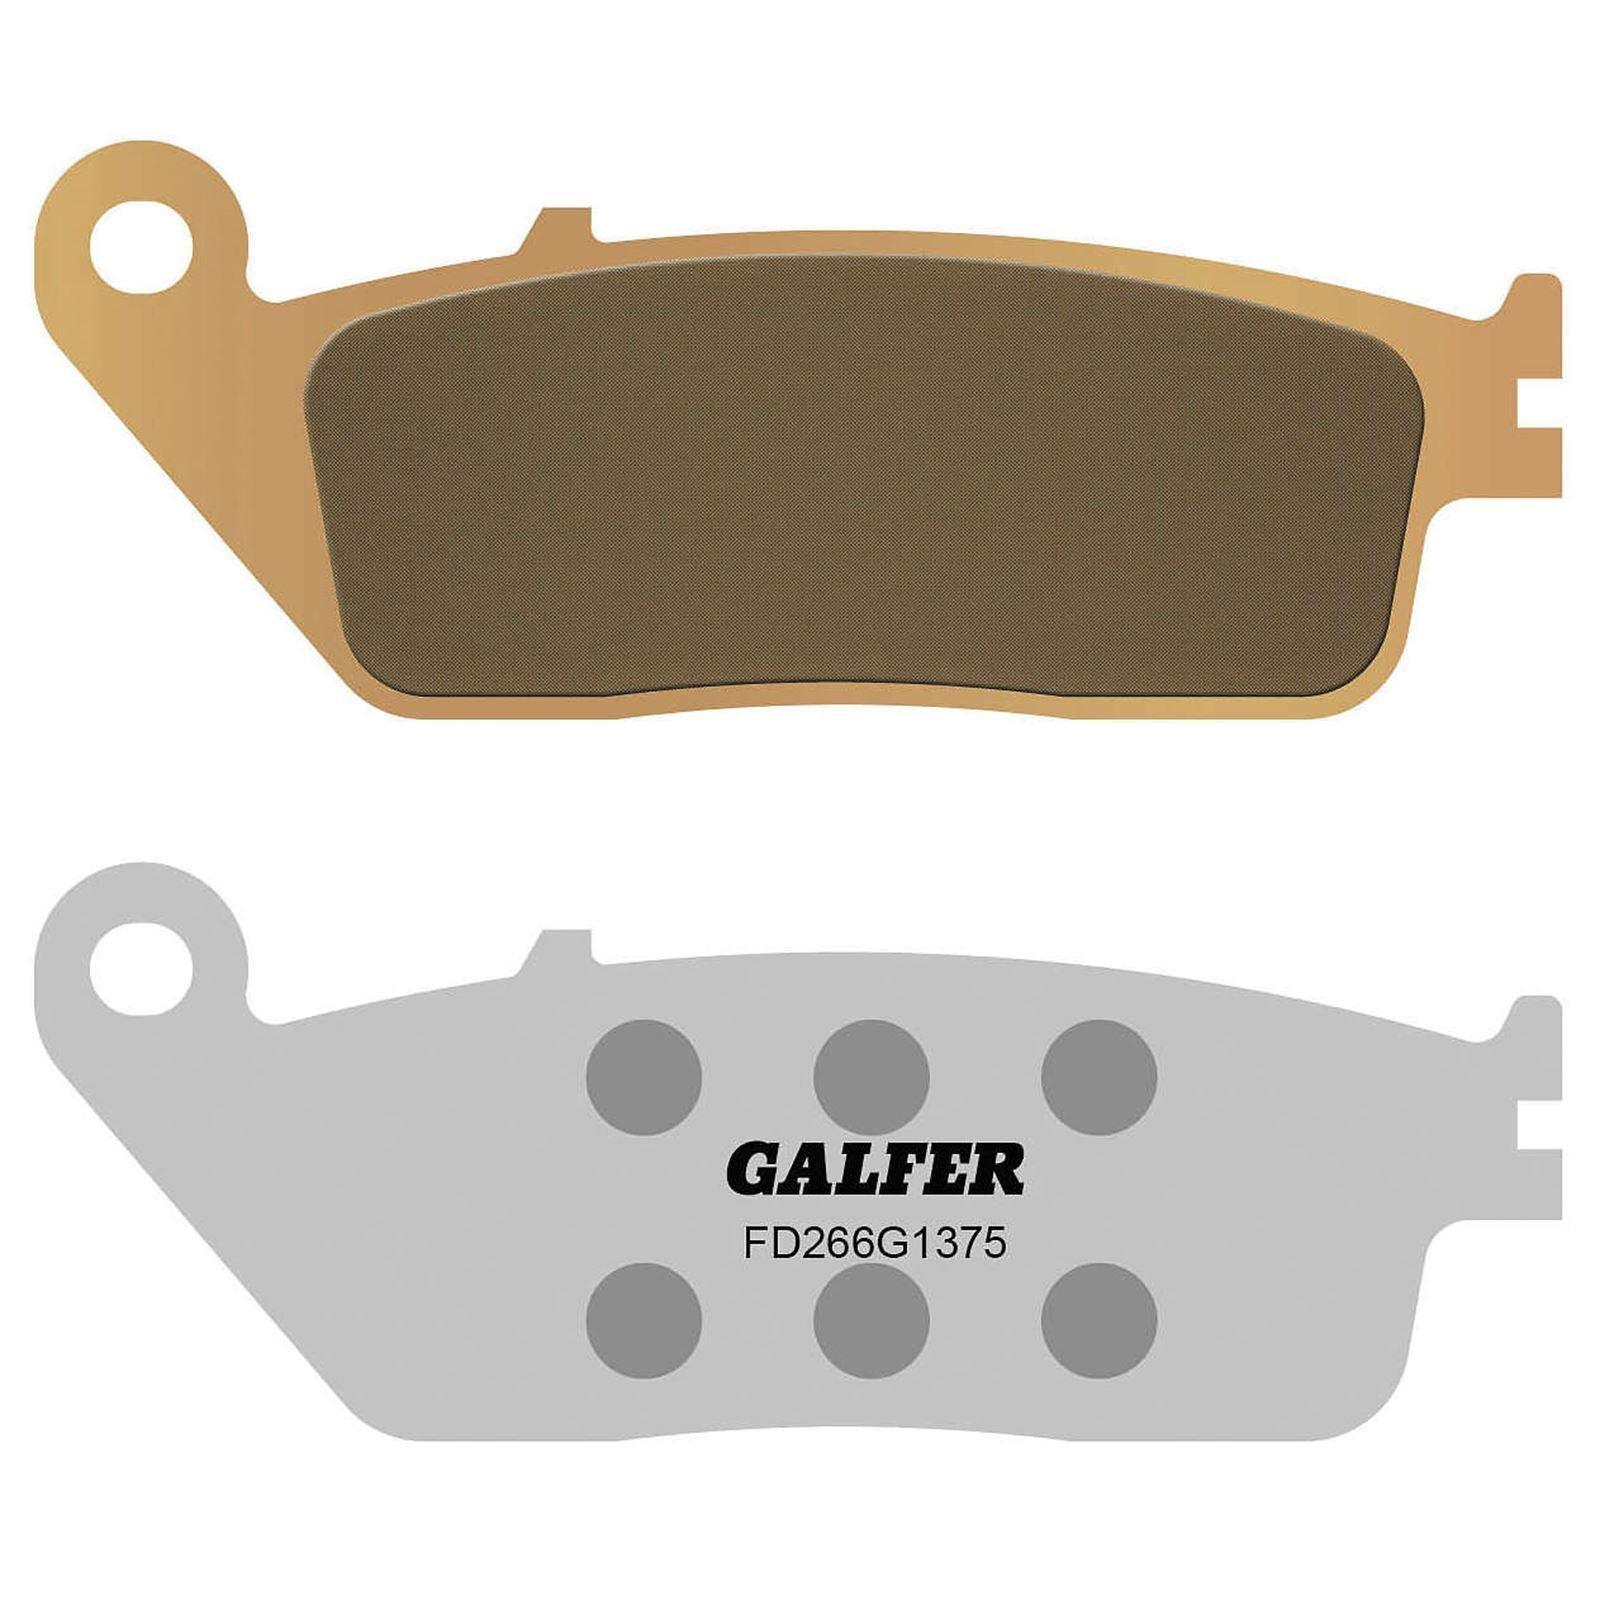 Galfer Front HH Sintered Brake Pads for Triumph Motorcycles (2002-2017) - British Customs